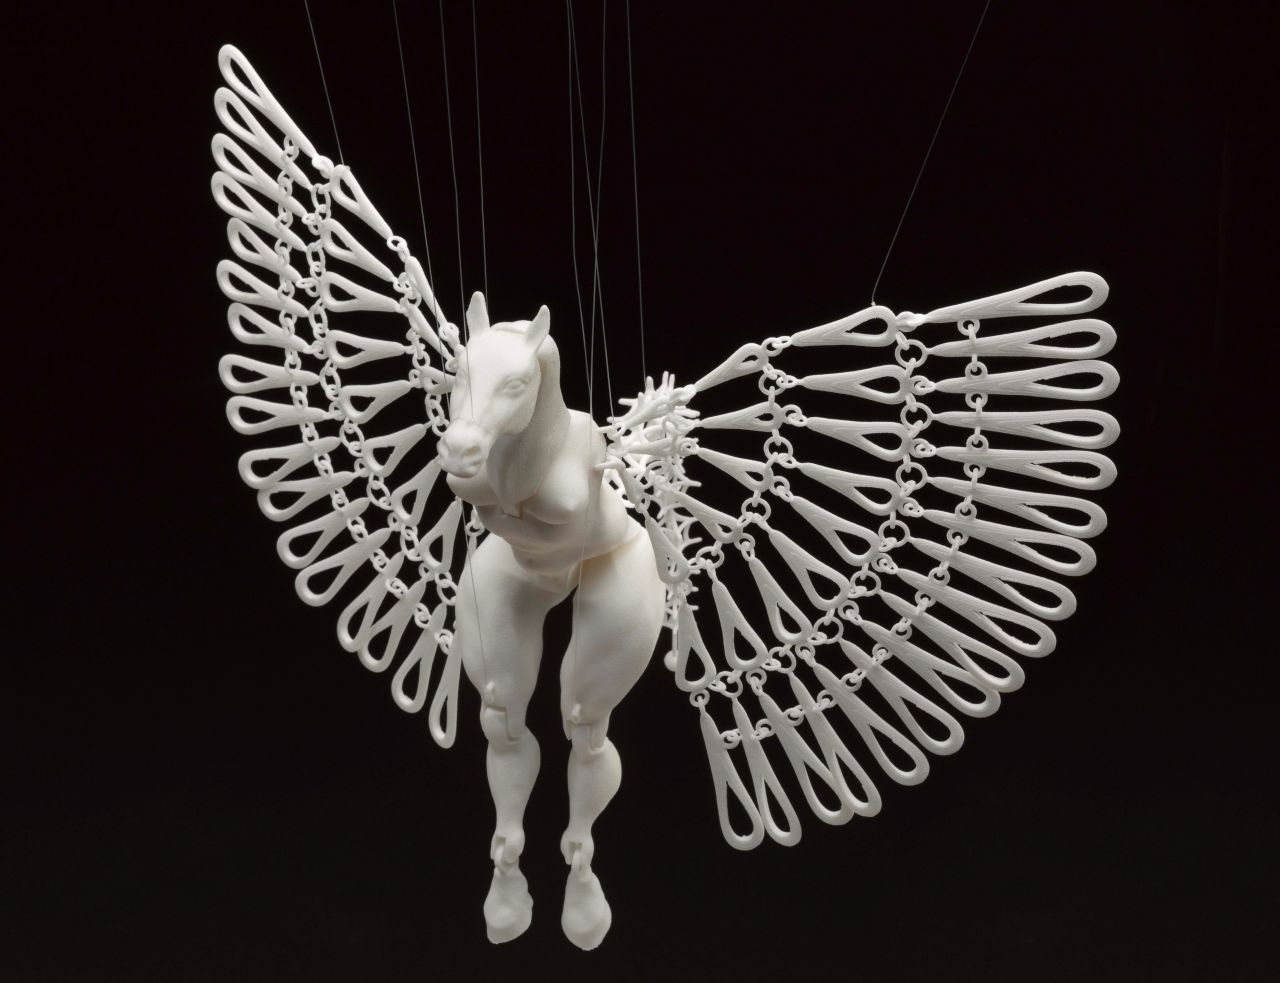 South African artist <a href="http://nomili.co.za/" target="_blank" target="_blank">Michaella Janse van Vuuren</a> says this intricate puppet could not have been made by hand. "The Horse Marionette has fully functional joints and movable wings," she says. "All the horse's parts have been placed in the same digital file so no assembly is required afterward. When strung up the horse comes to life."